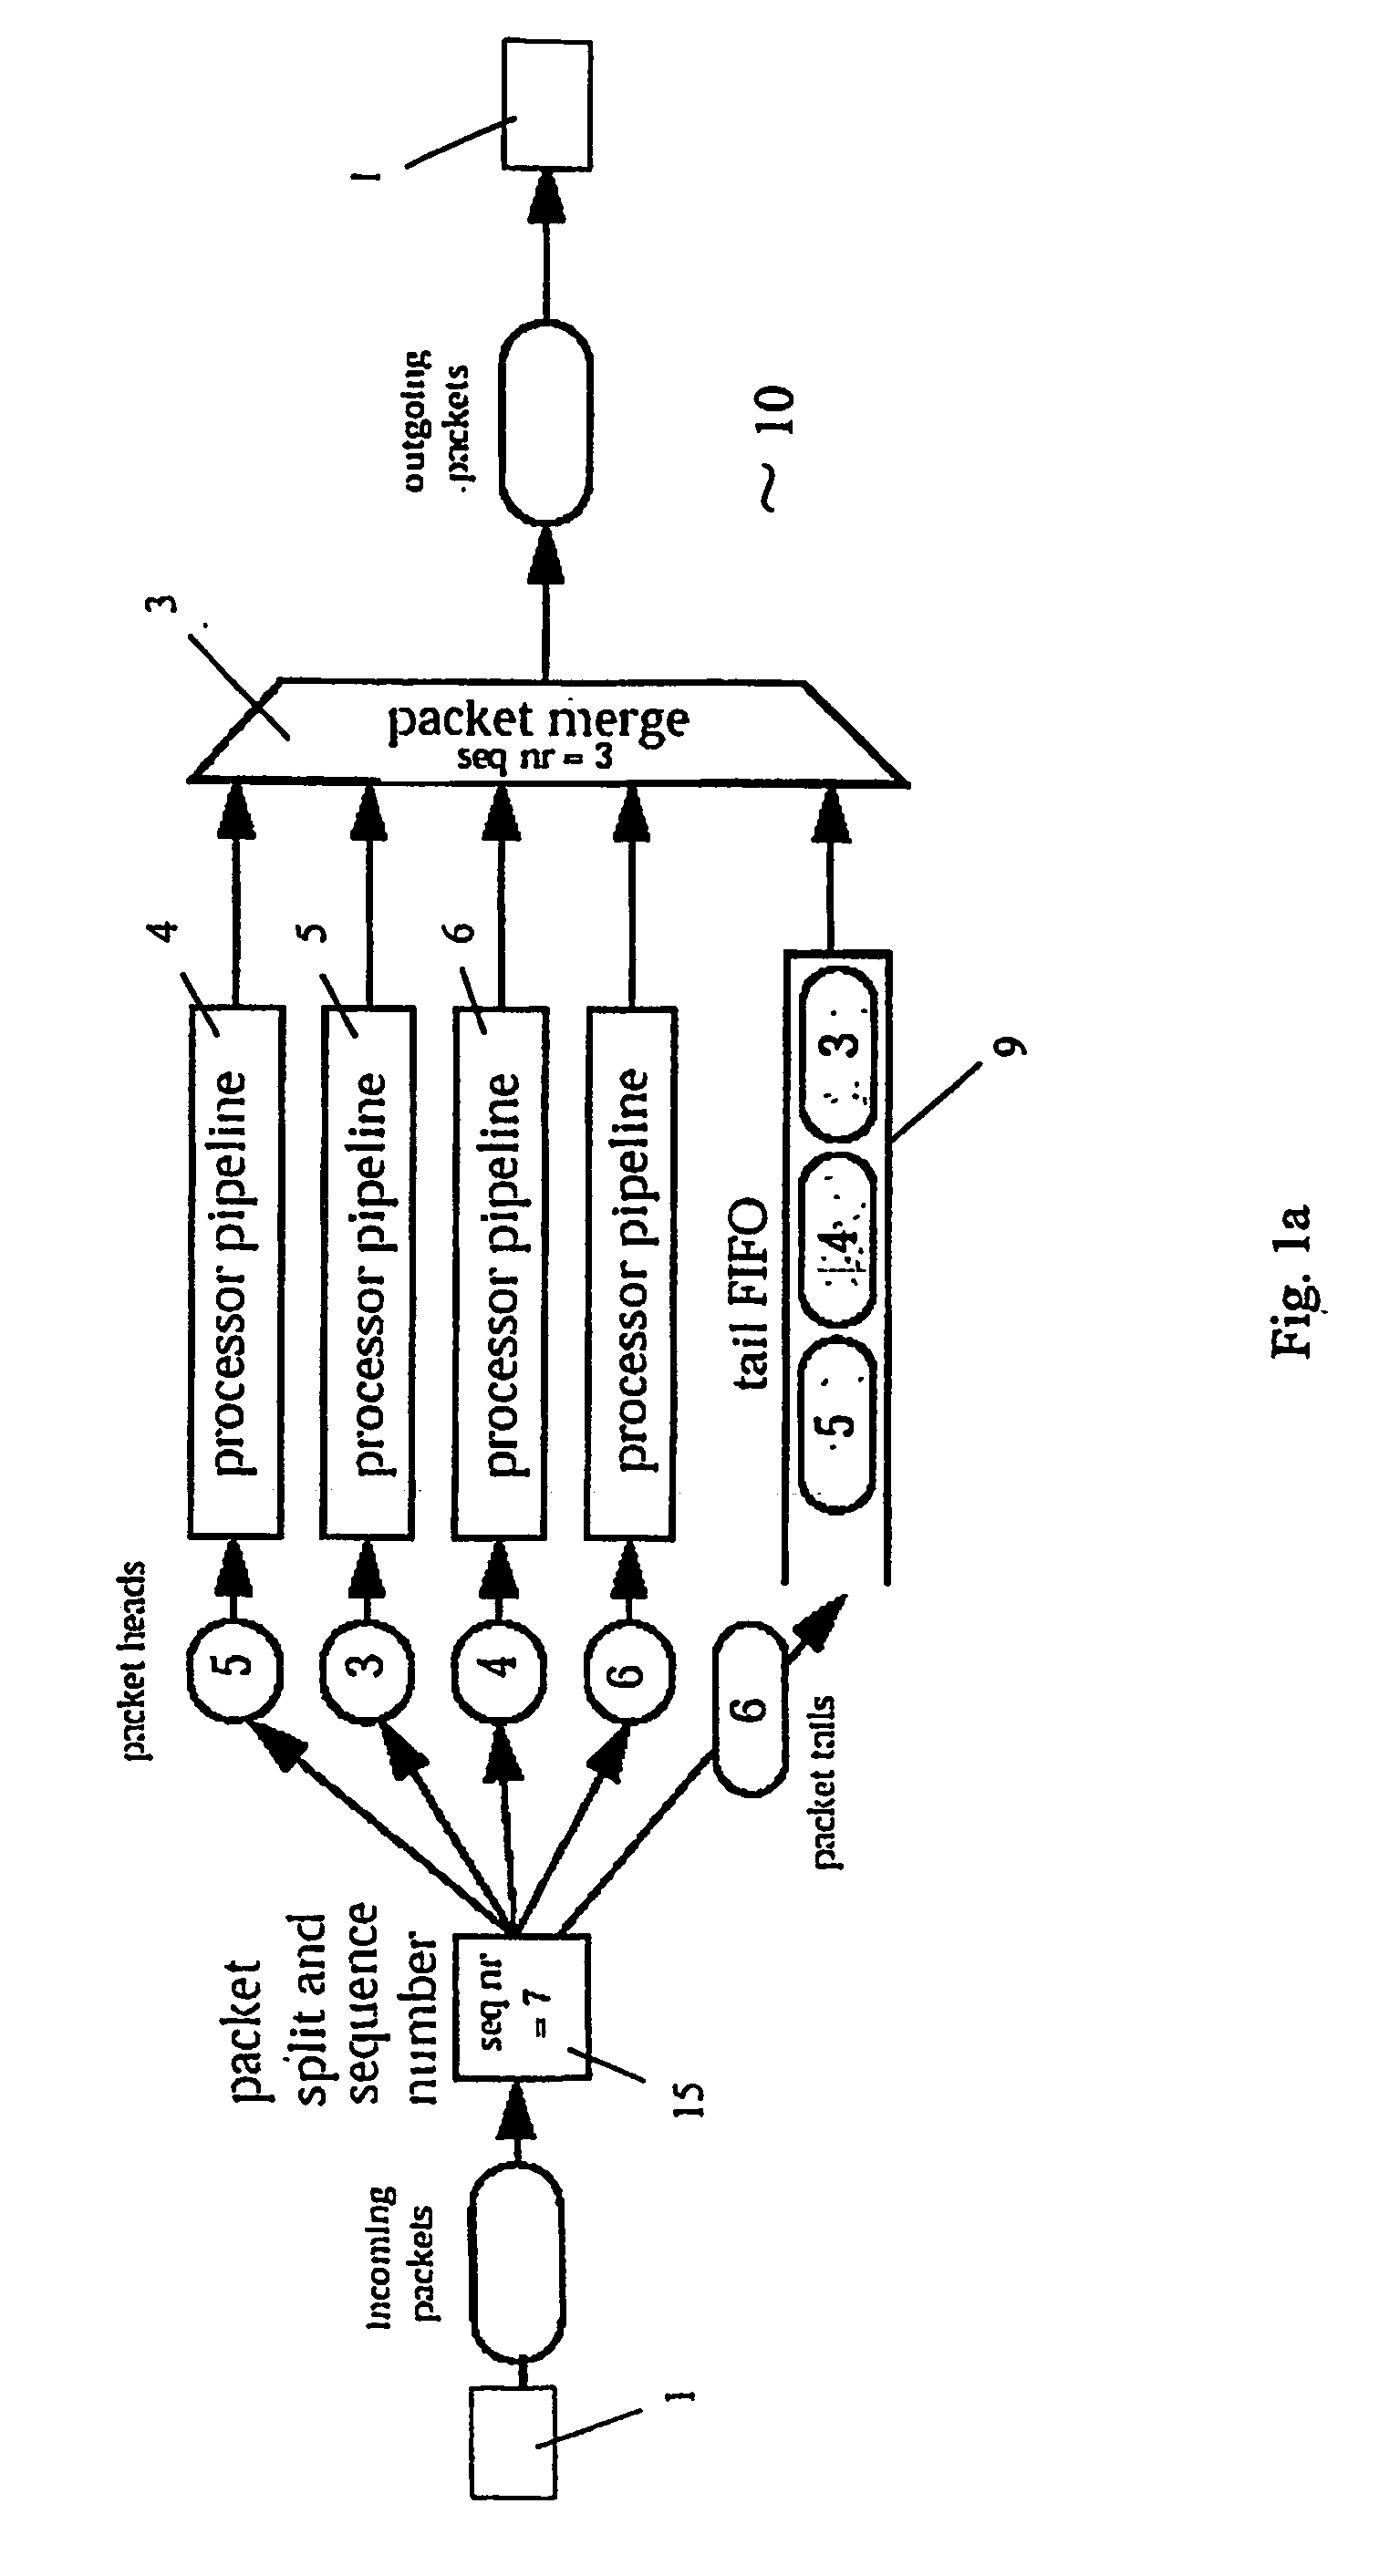 Efficient packet processing pipeline device and method